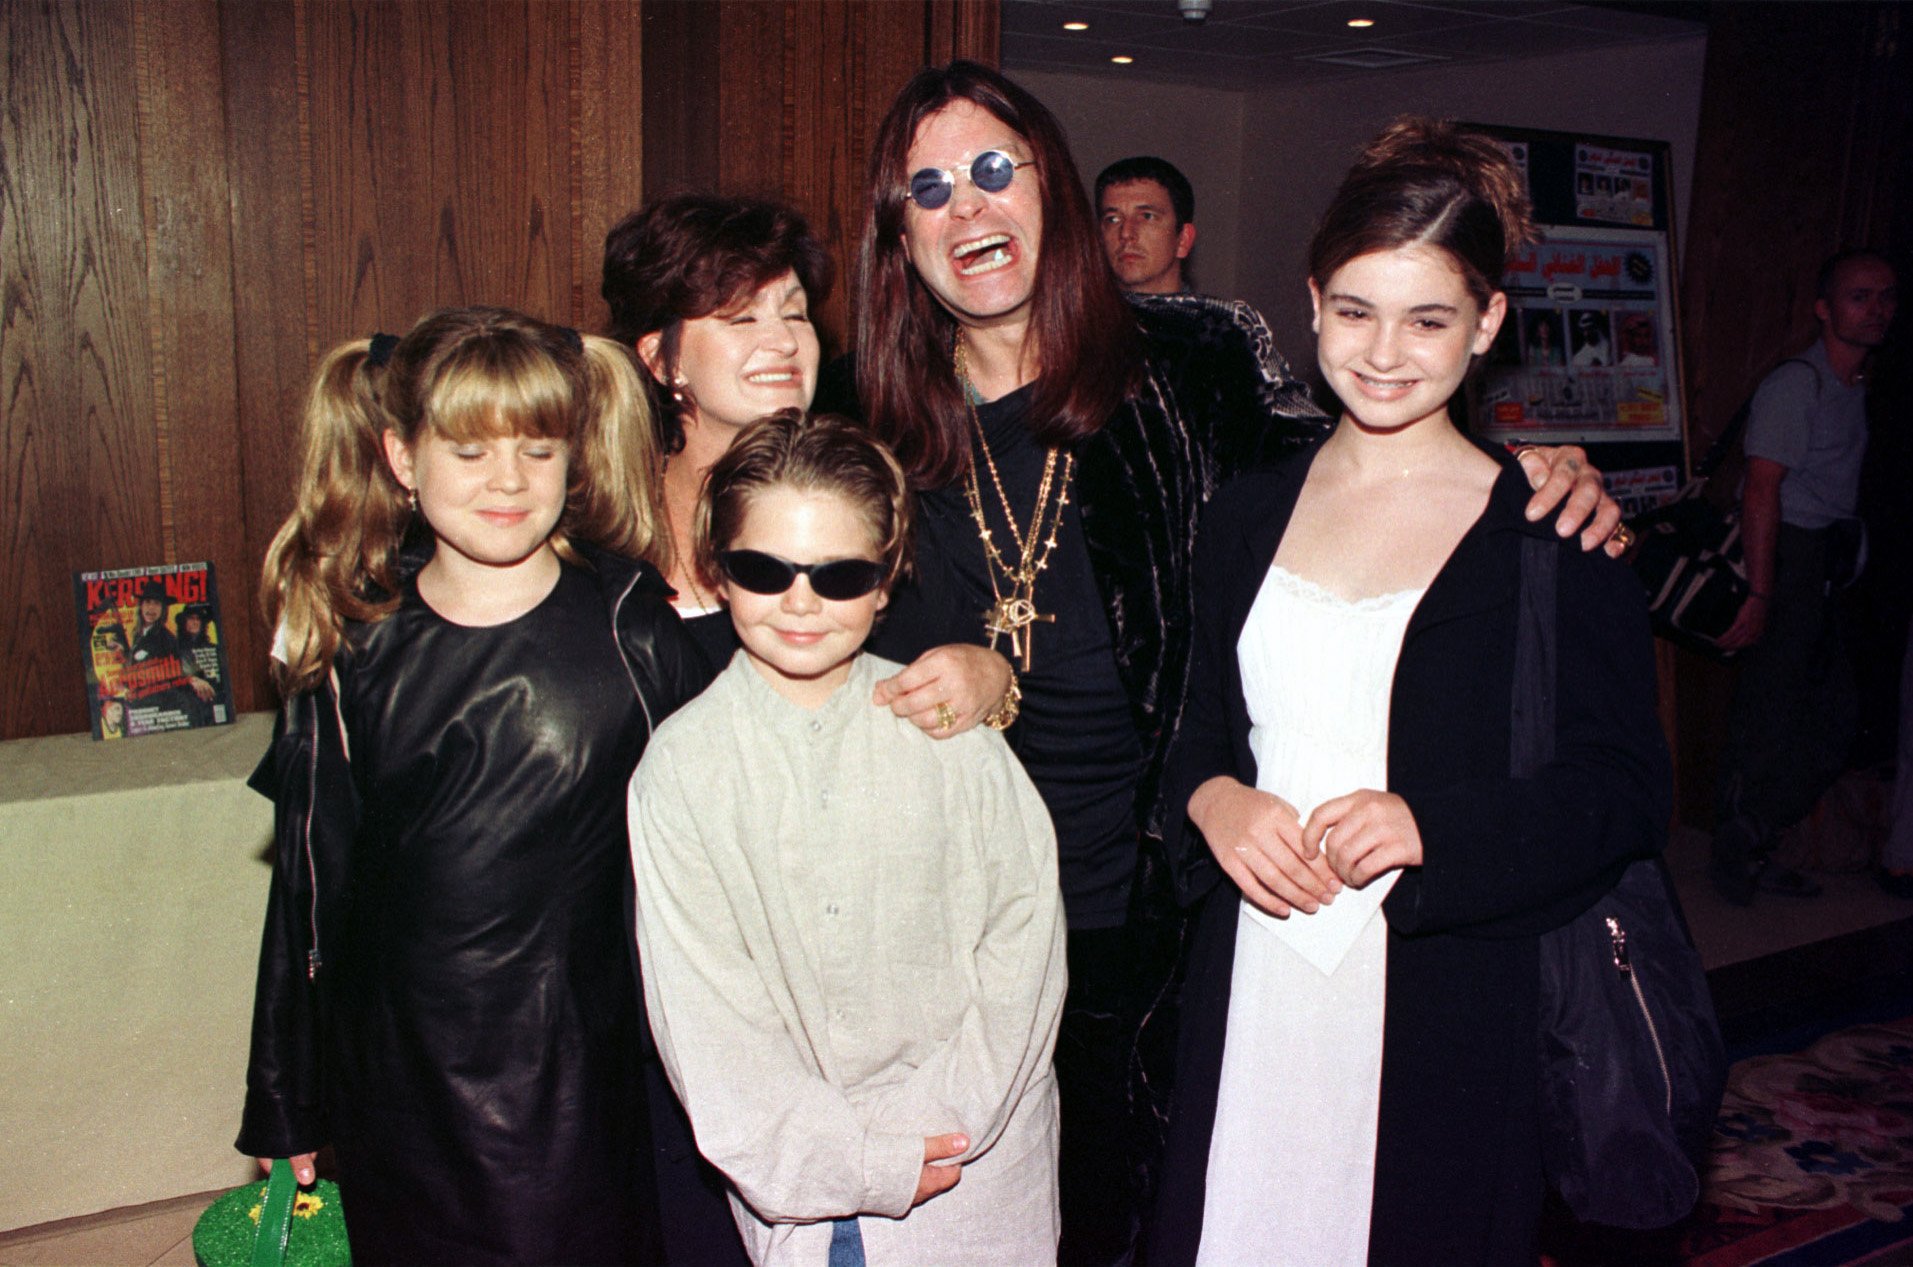 Ozzy Osbourne, wife Sharon, and their children Kelly, Jack and Aimee Osbourne at the Kerrang Awards 1997 in London | Source: Getty Images